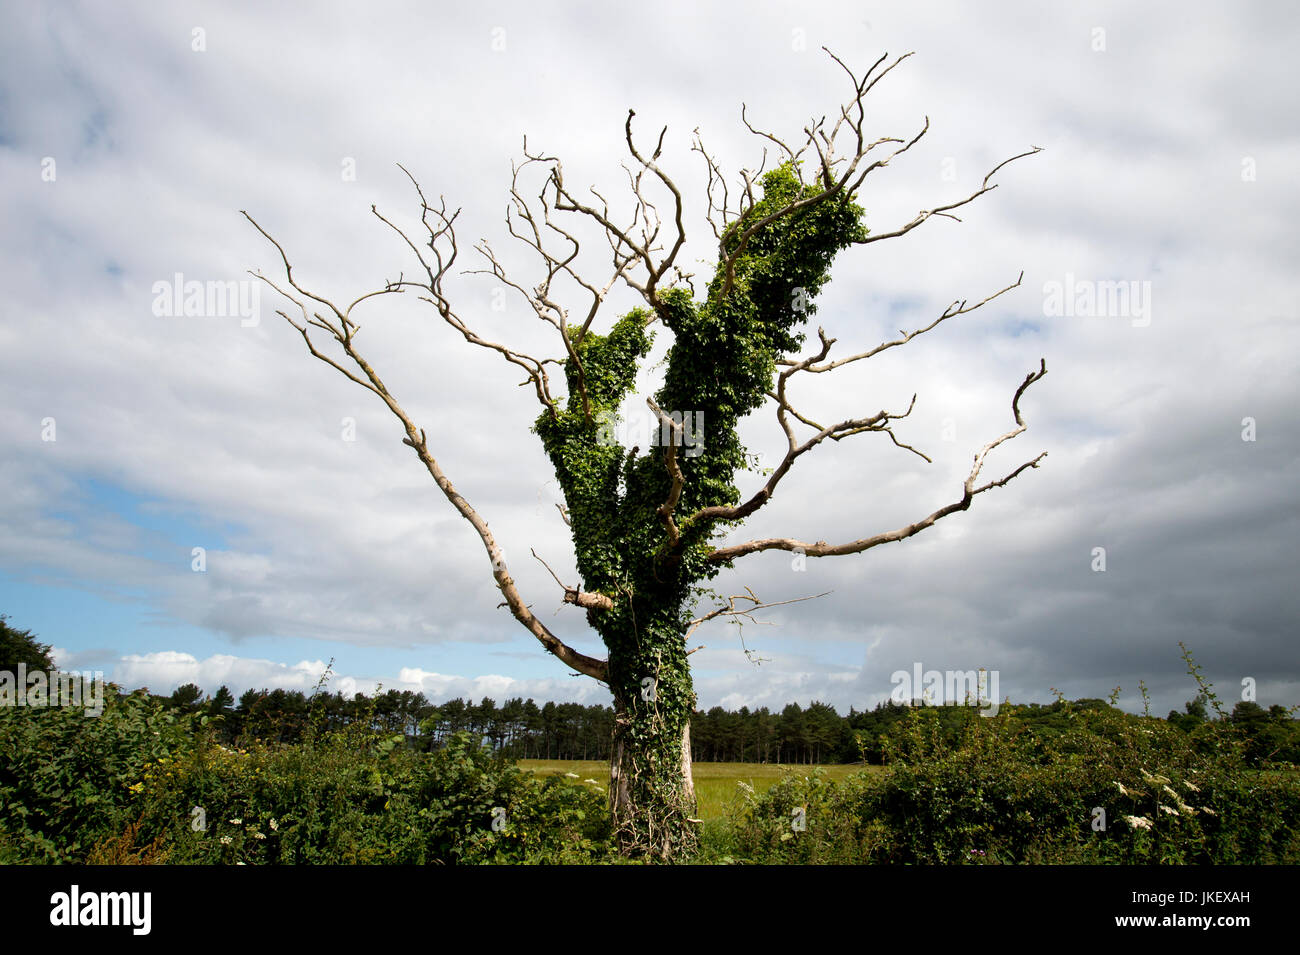 Scotland. West Kilbride. Landscape with a dead ivy-covered tree Stock Photo